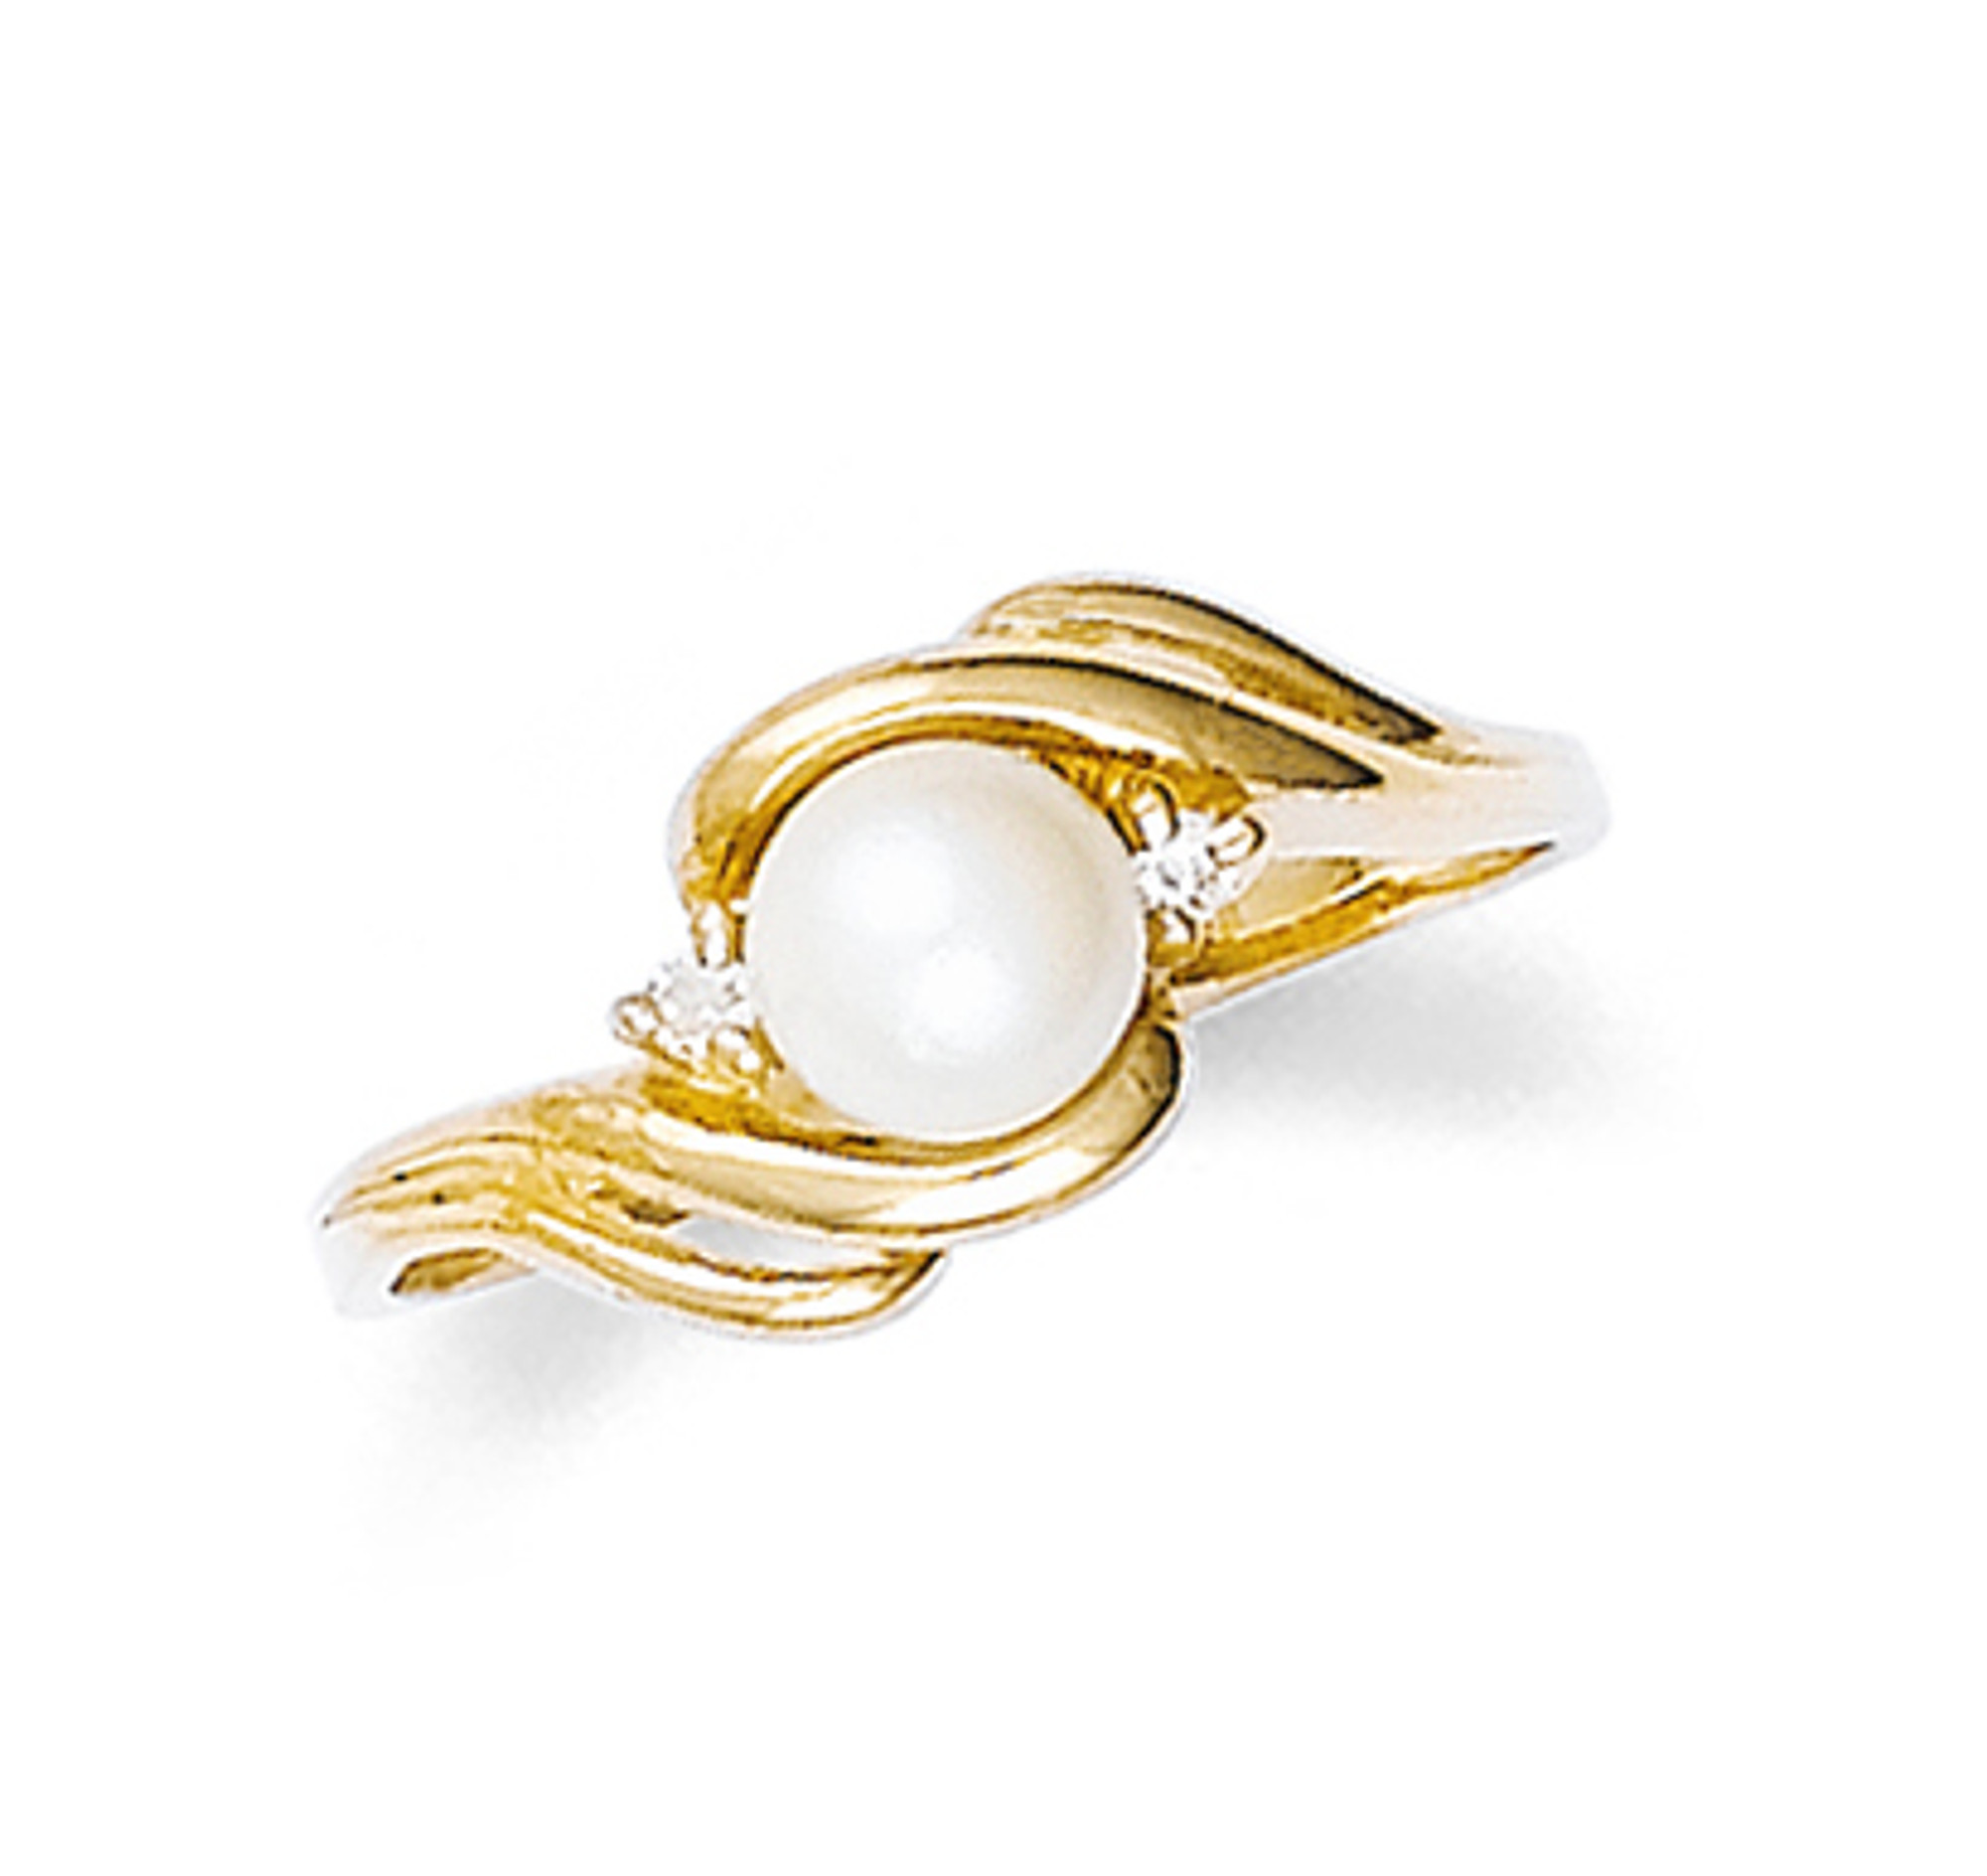 Pave Set Diamond and Pearl Ring, 10.0-11.0 mm Golden South Sea Pearl